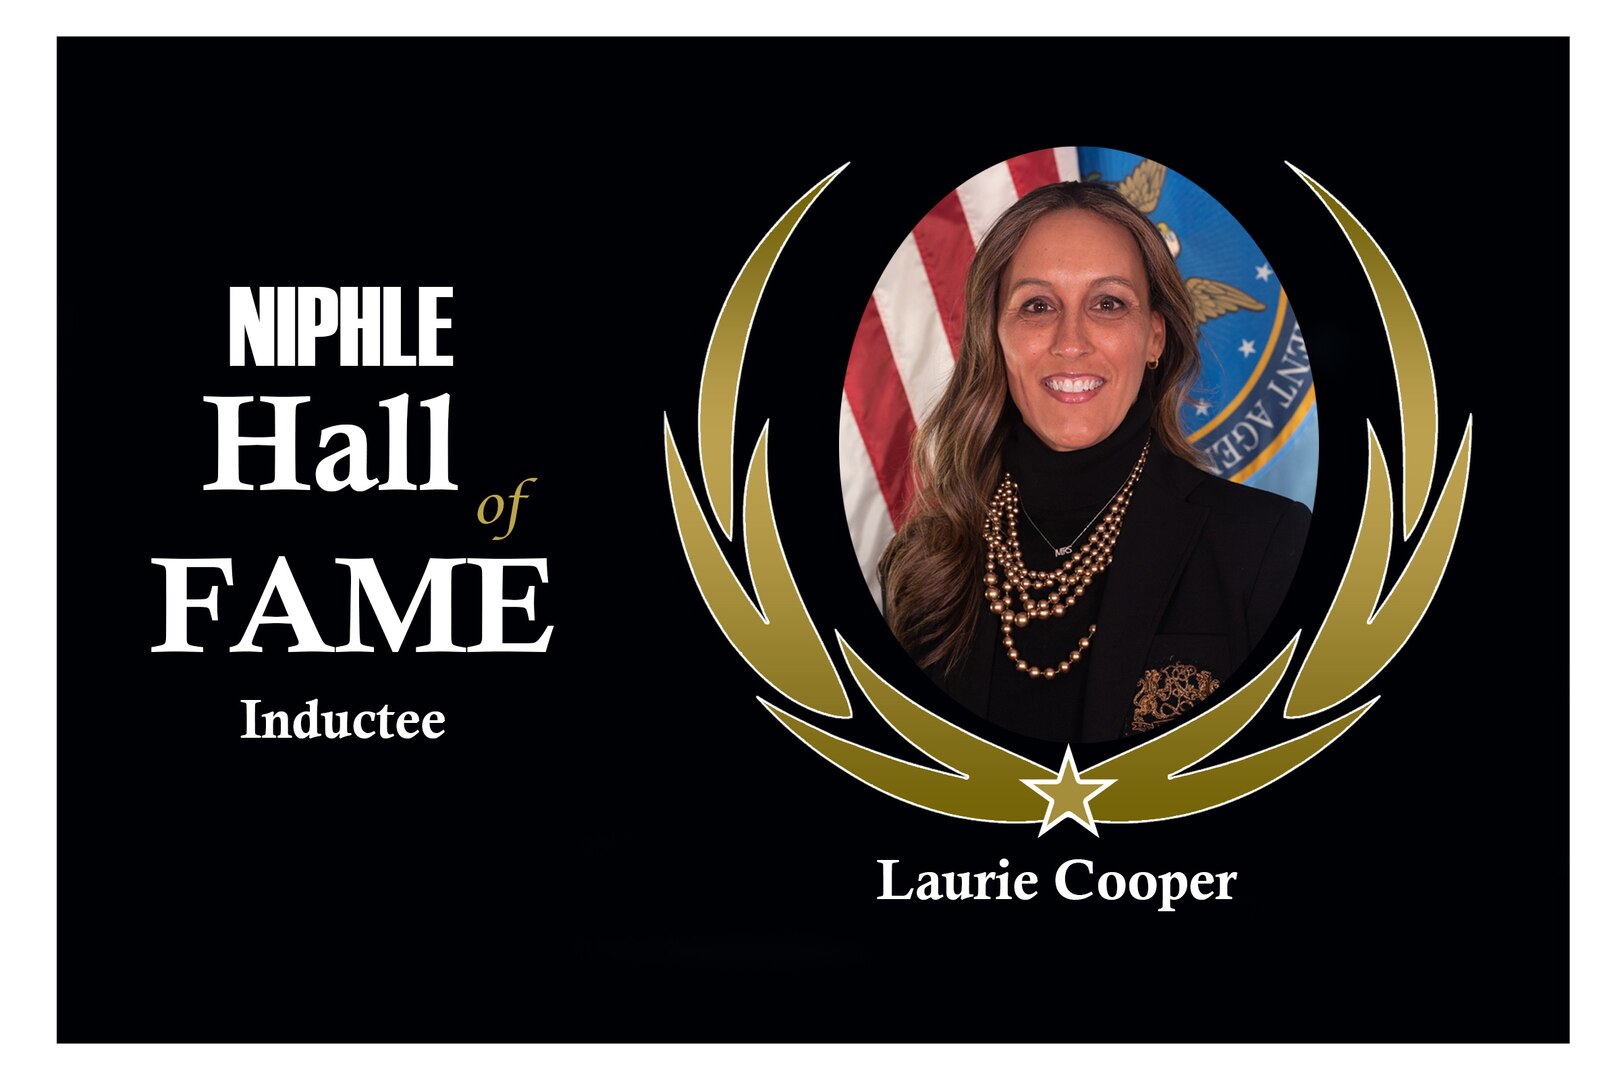 Photo of smiling woman with text that reads: NIPHLE Hall of Fame Inductee Laurie Cooper